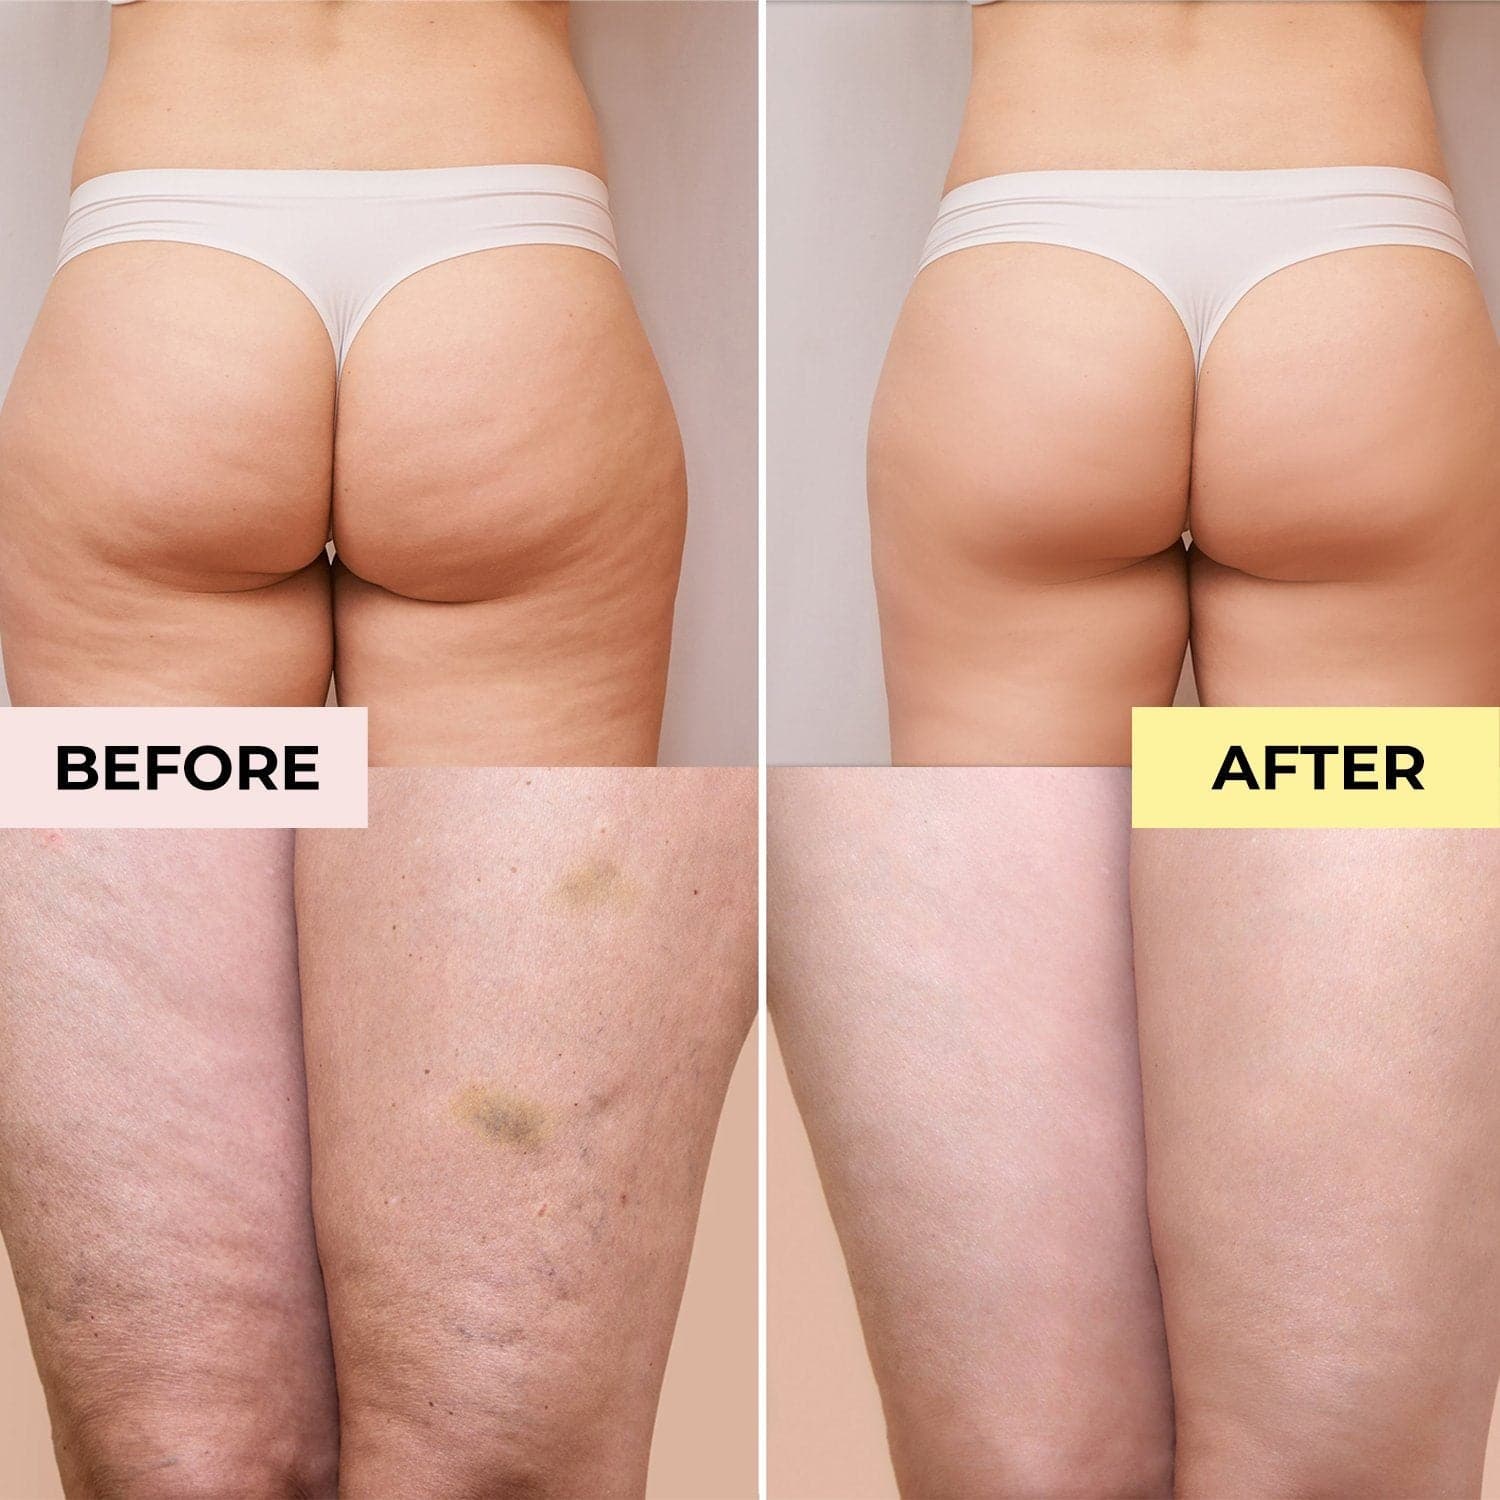 Life's Butter anti-cellulite cream, body firming, stretch mark removal, before and after photos